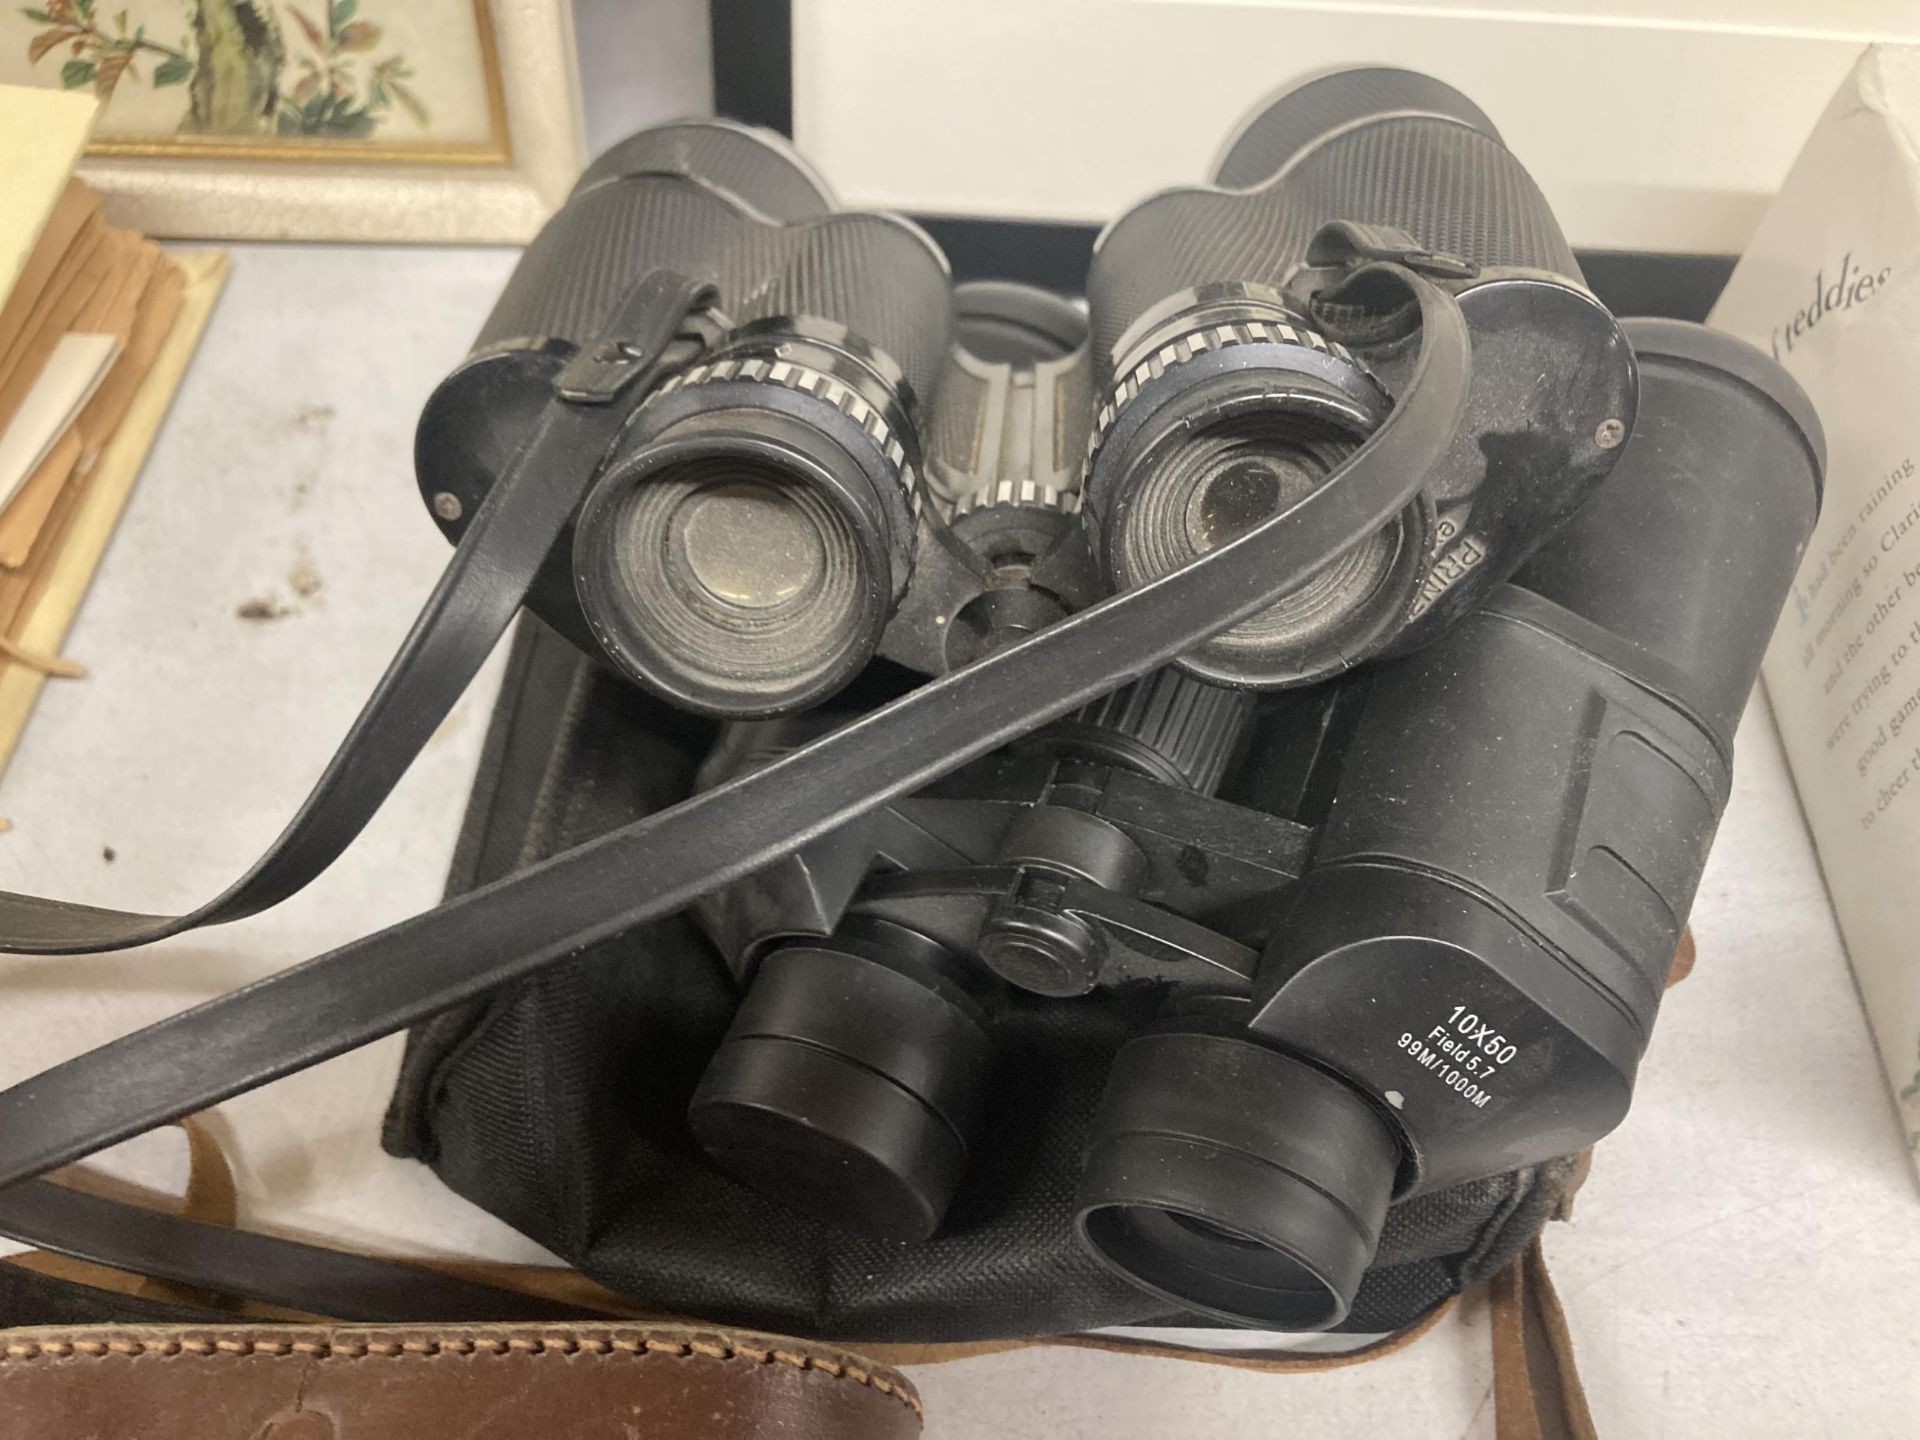 A THREE PAIRS OF BINOCULARS MADE IN BRITAIN AND HONG KONG PLUS A VINTAGE AGFA SILEETE CAMERA - Image 6 of 6